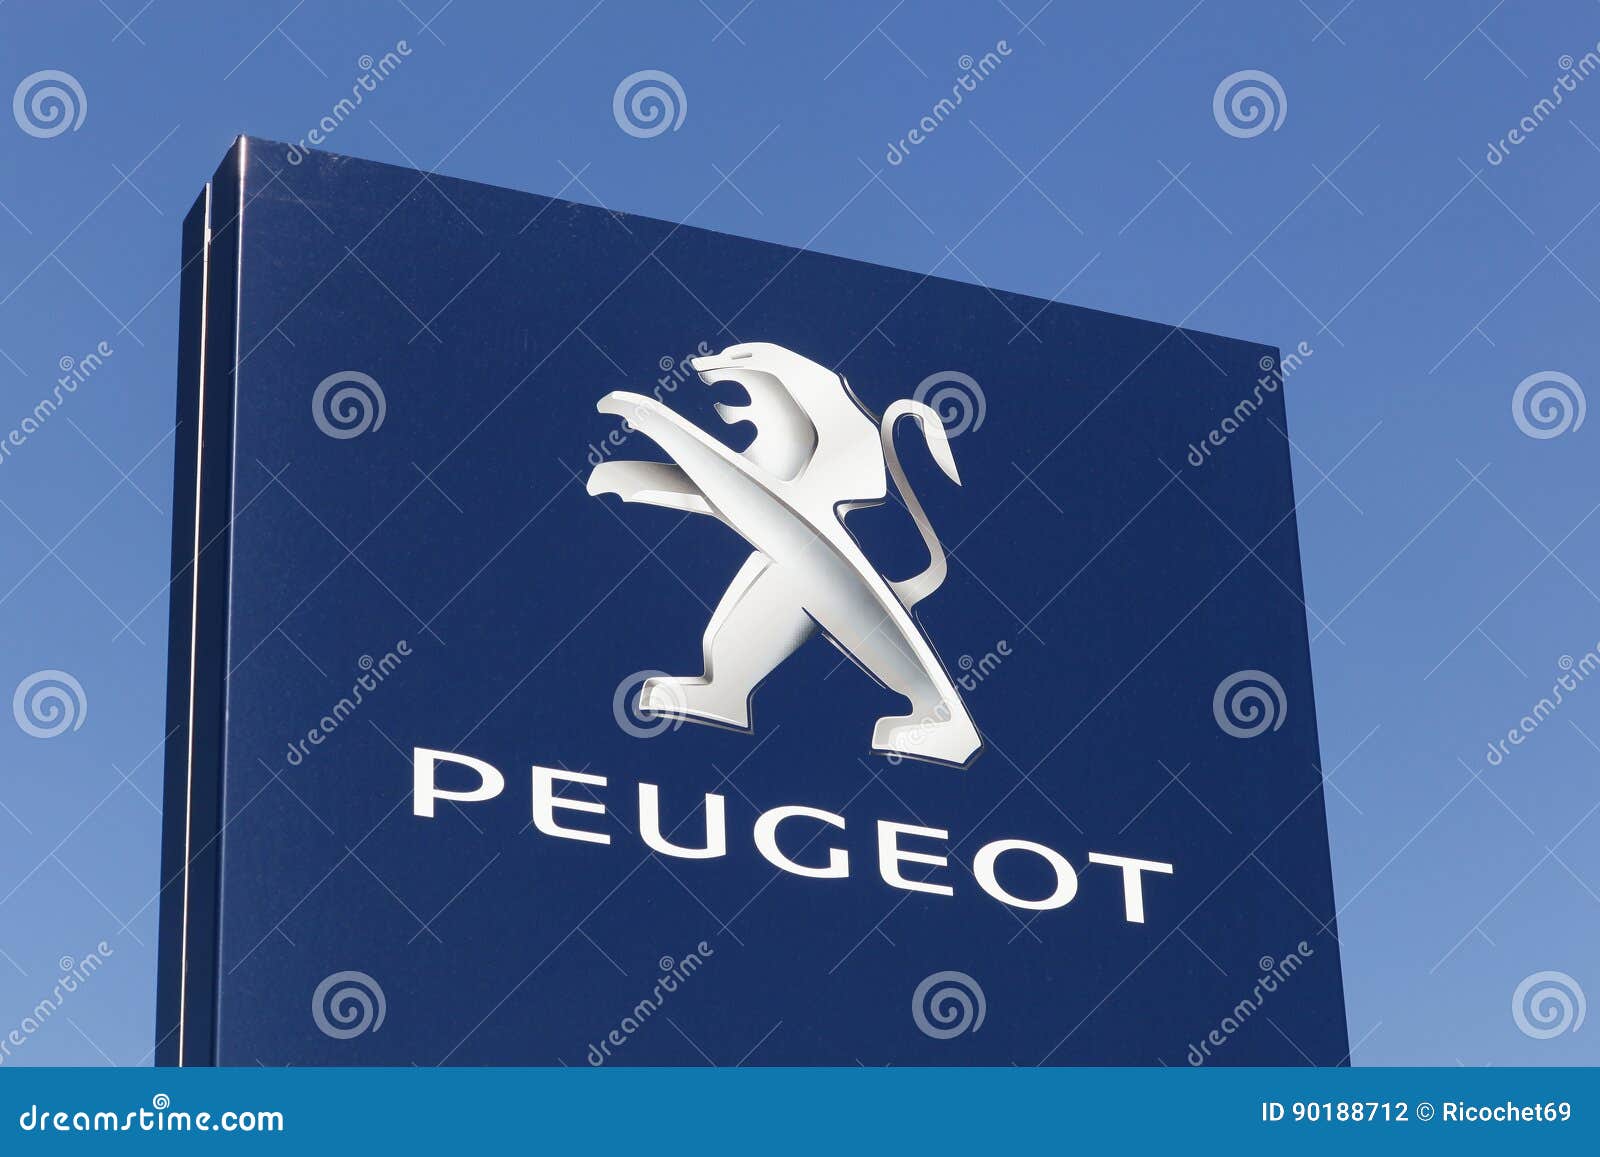 Peugeot logo on a panel editorial photography. Image of